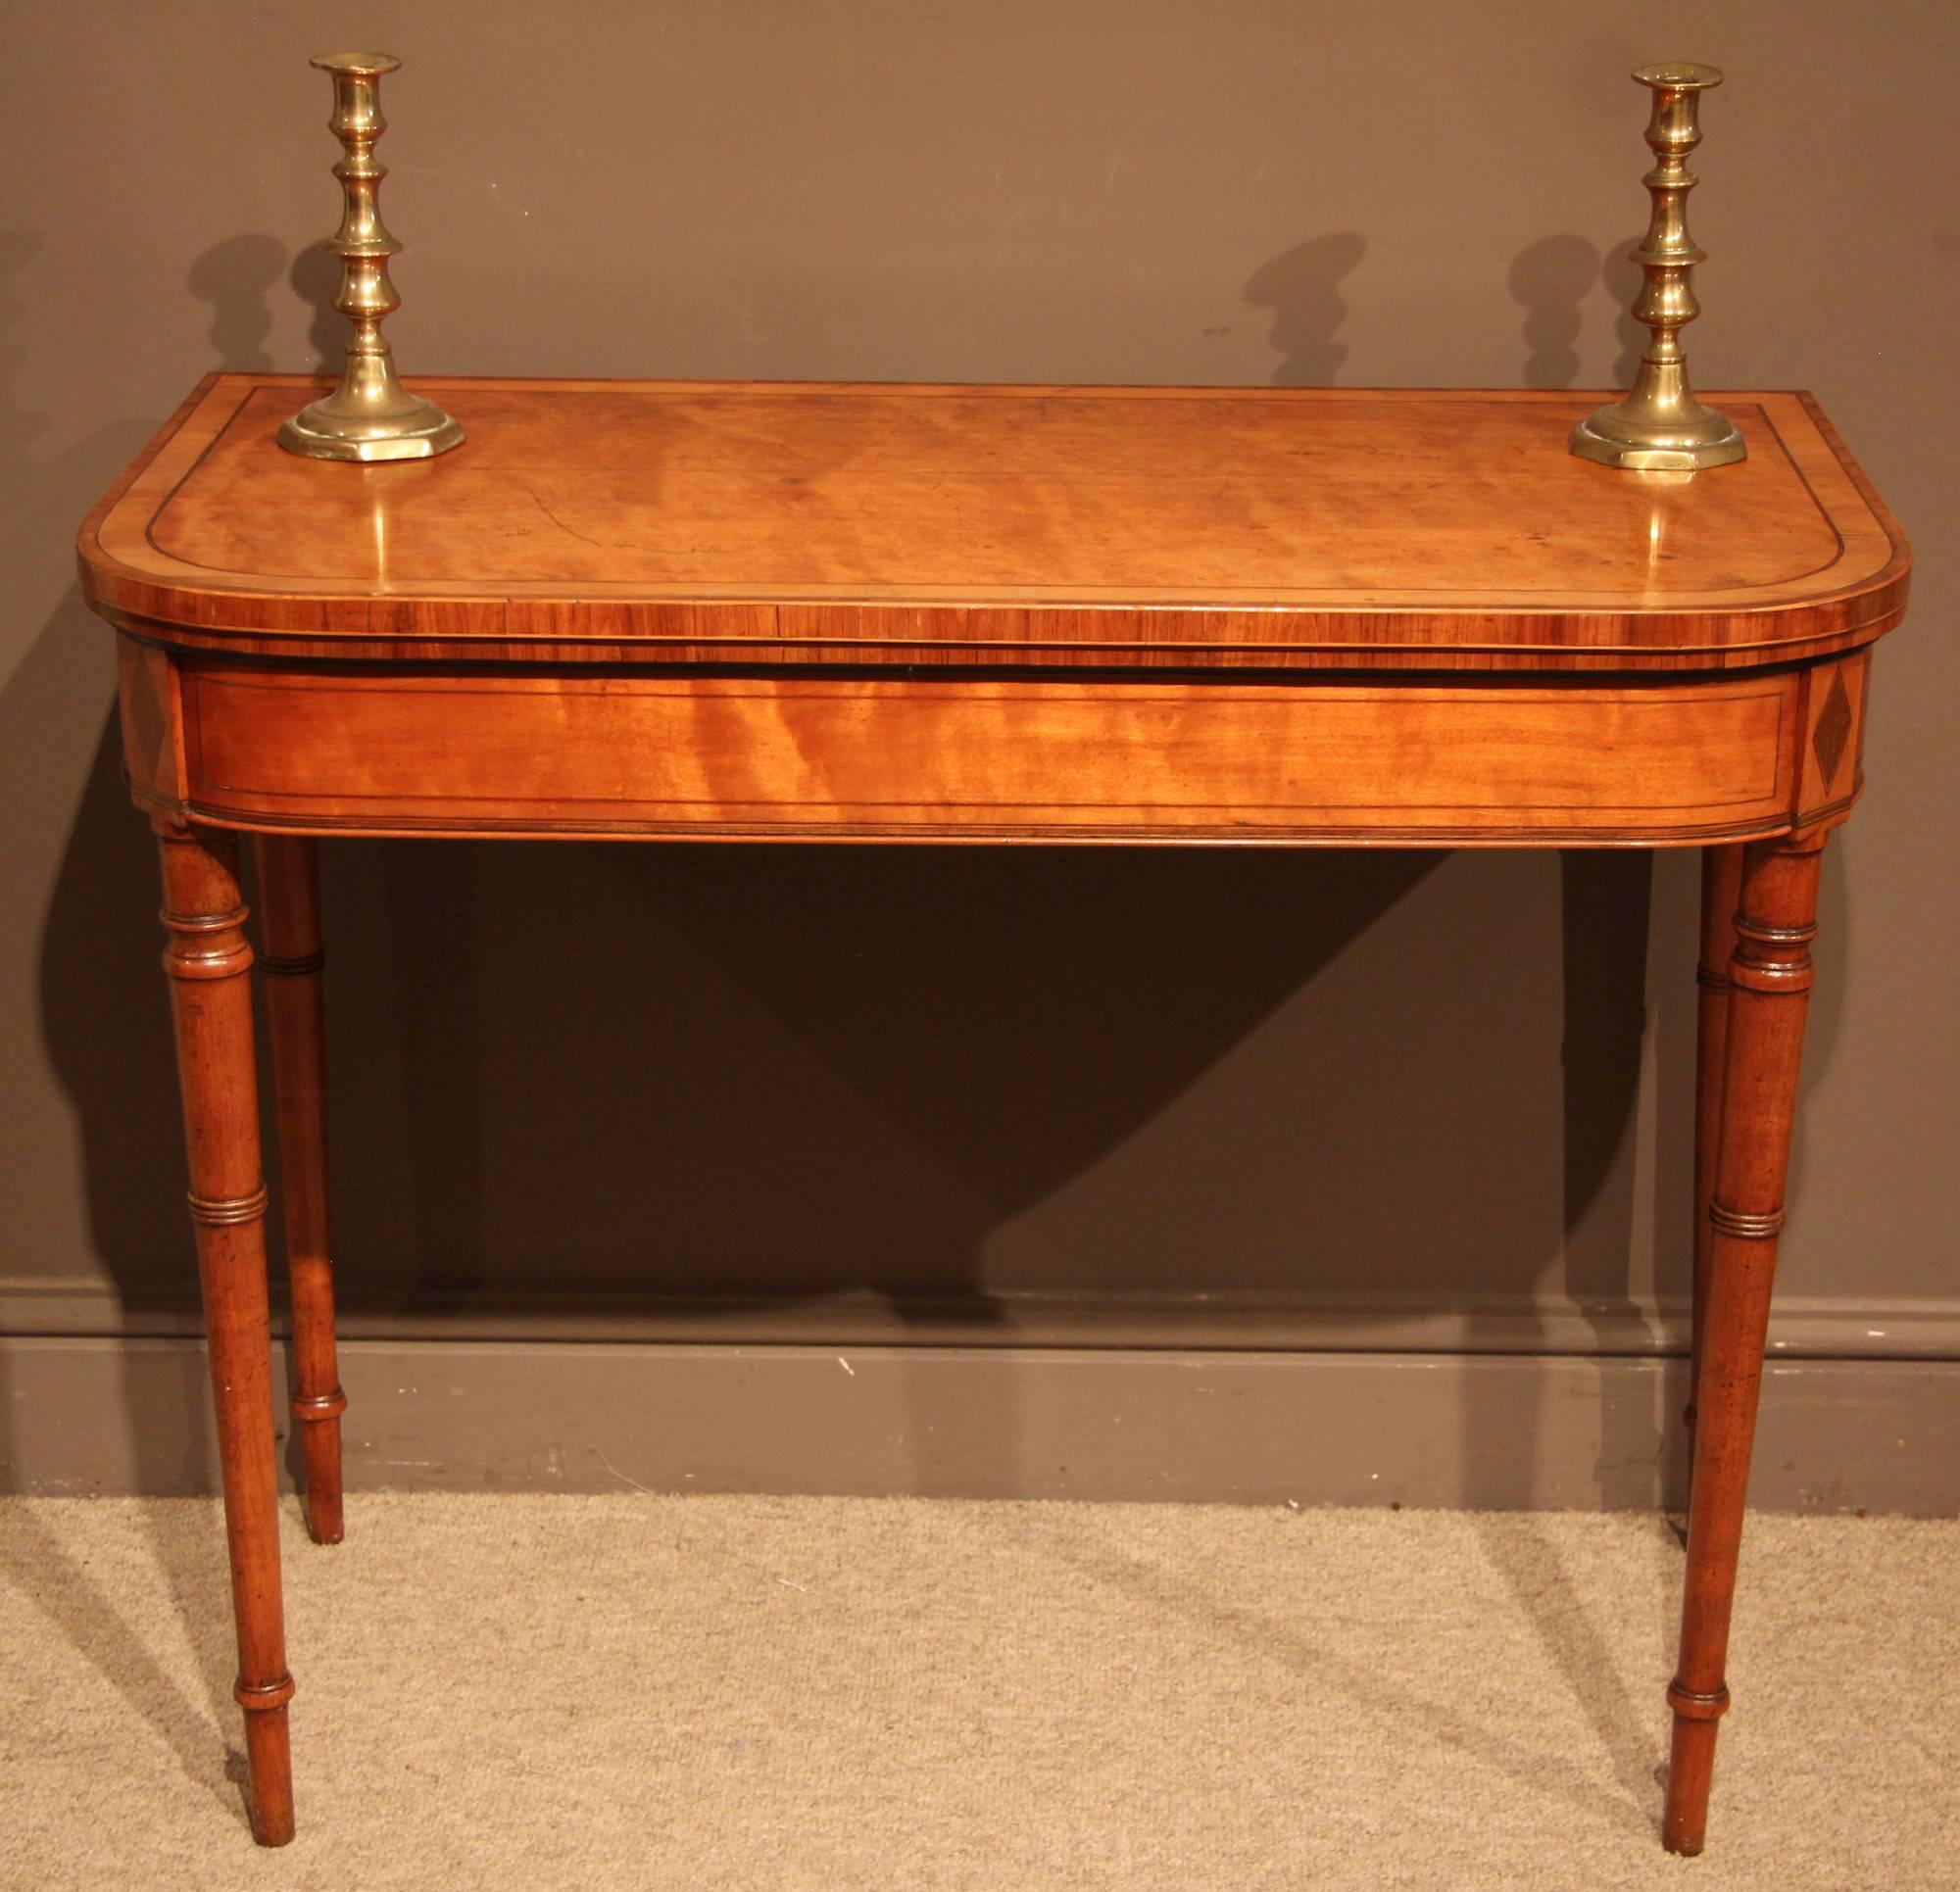 A fine late George III satinwood and rosewood crossbanded card table with boxwood stringing, circa 1810.

All of the items that we advertise for sale have been as accurately described as possible and are in excellent condition, unless otherwise